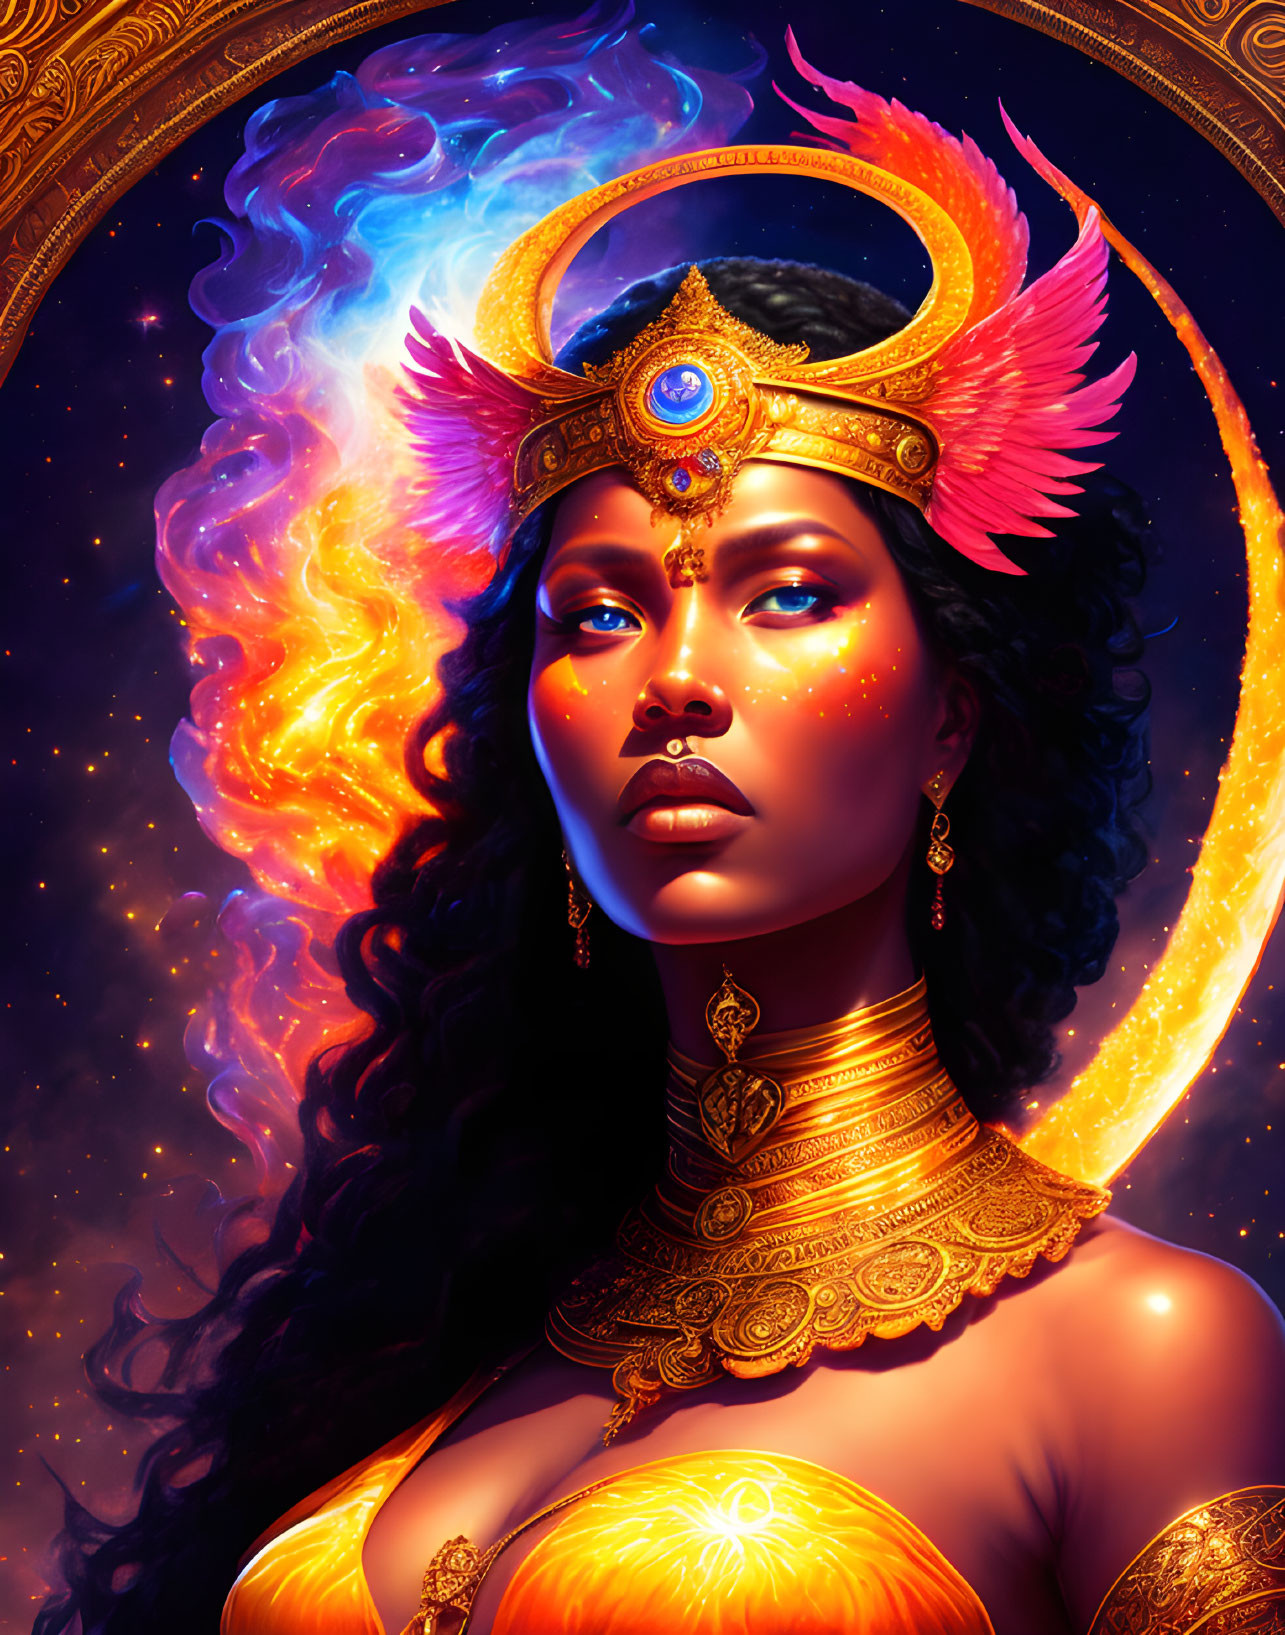 Regal woman with celestial adornments and cosmic aura on starry background